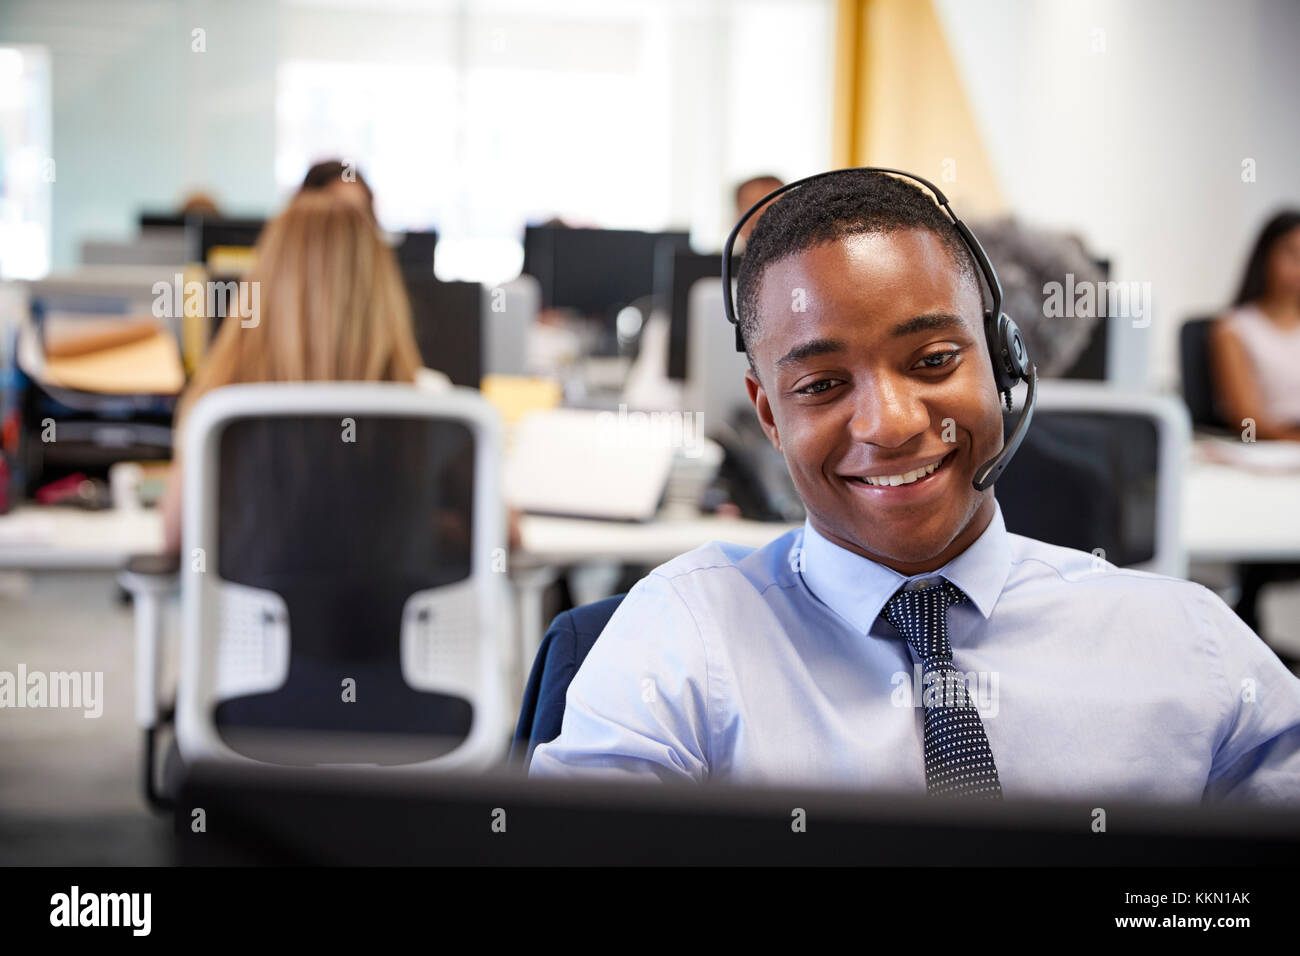 Young man working at computer with headset in busy office Stock Photo